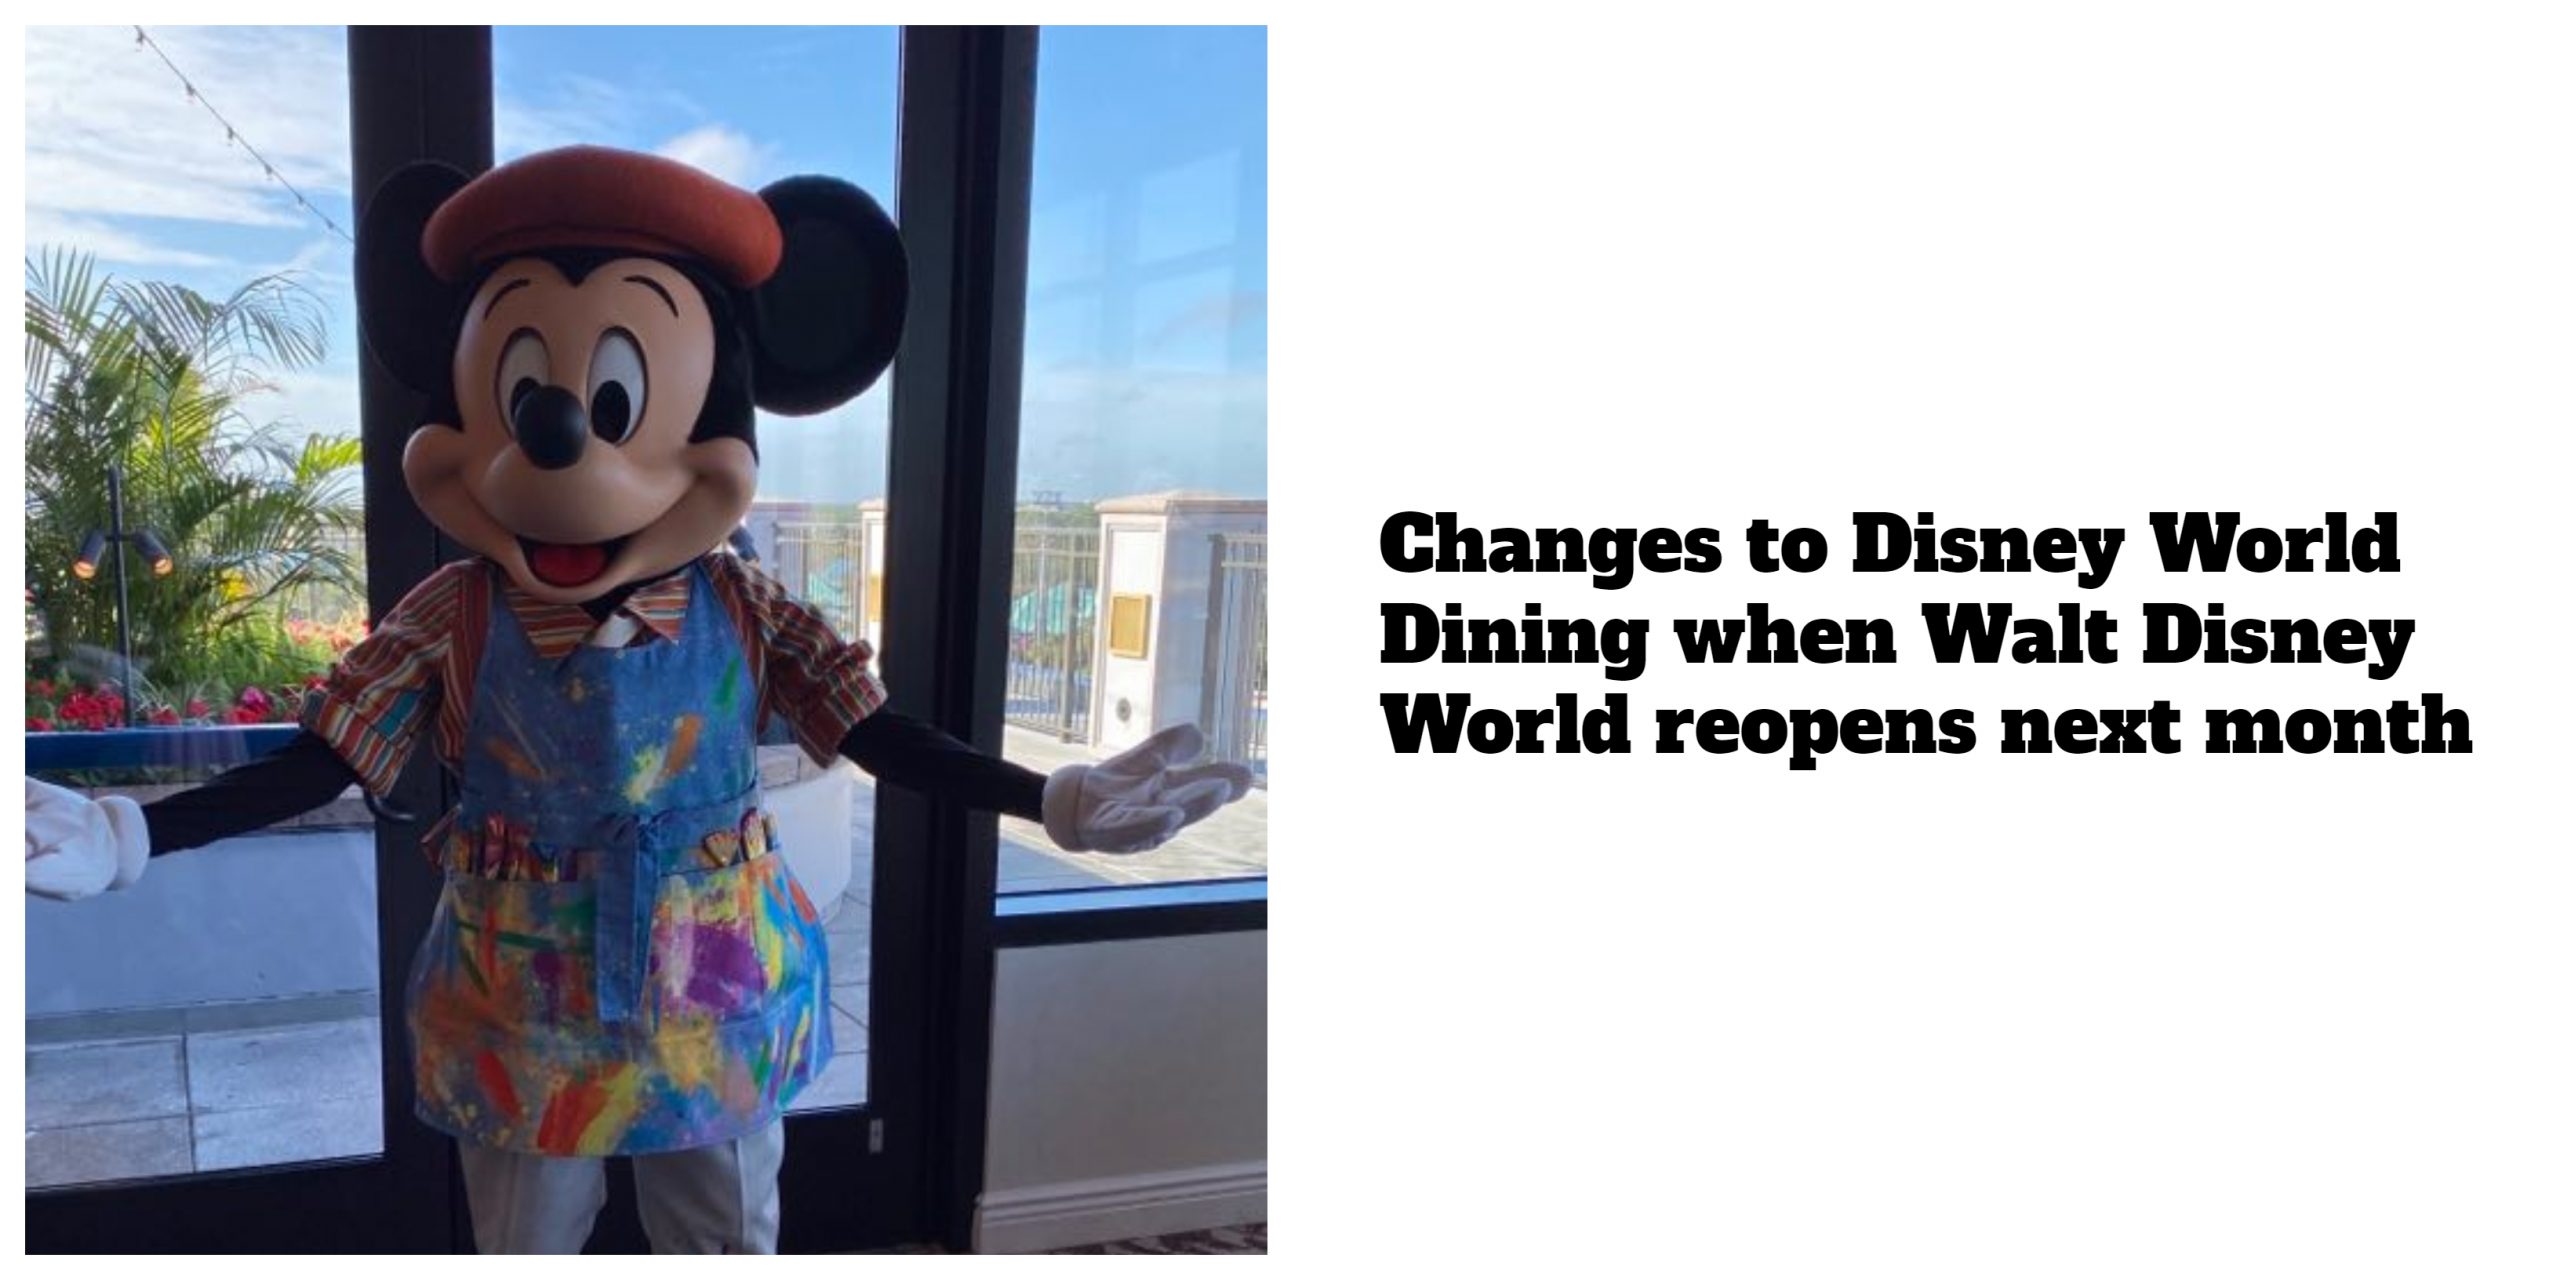 Changes to Disney World Dining when Walt Disney World reopens next month